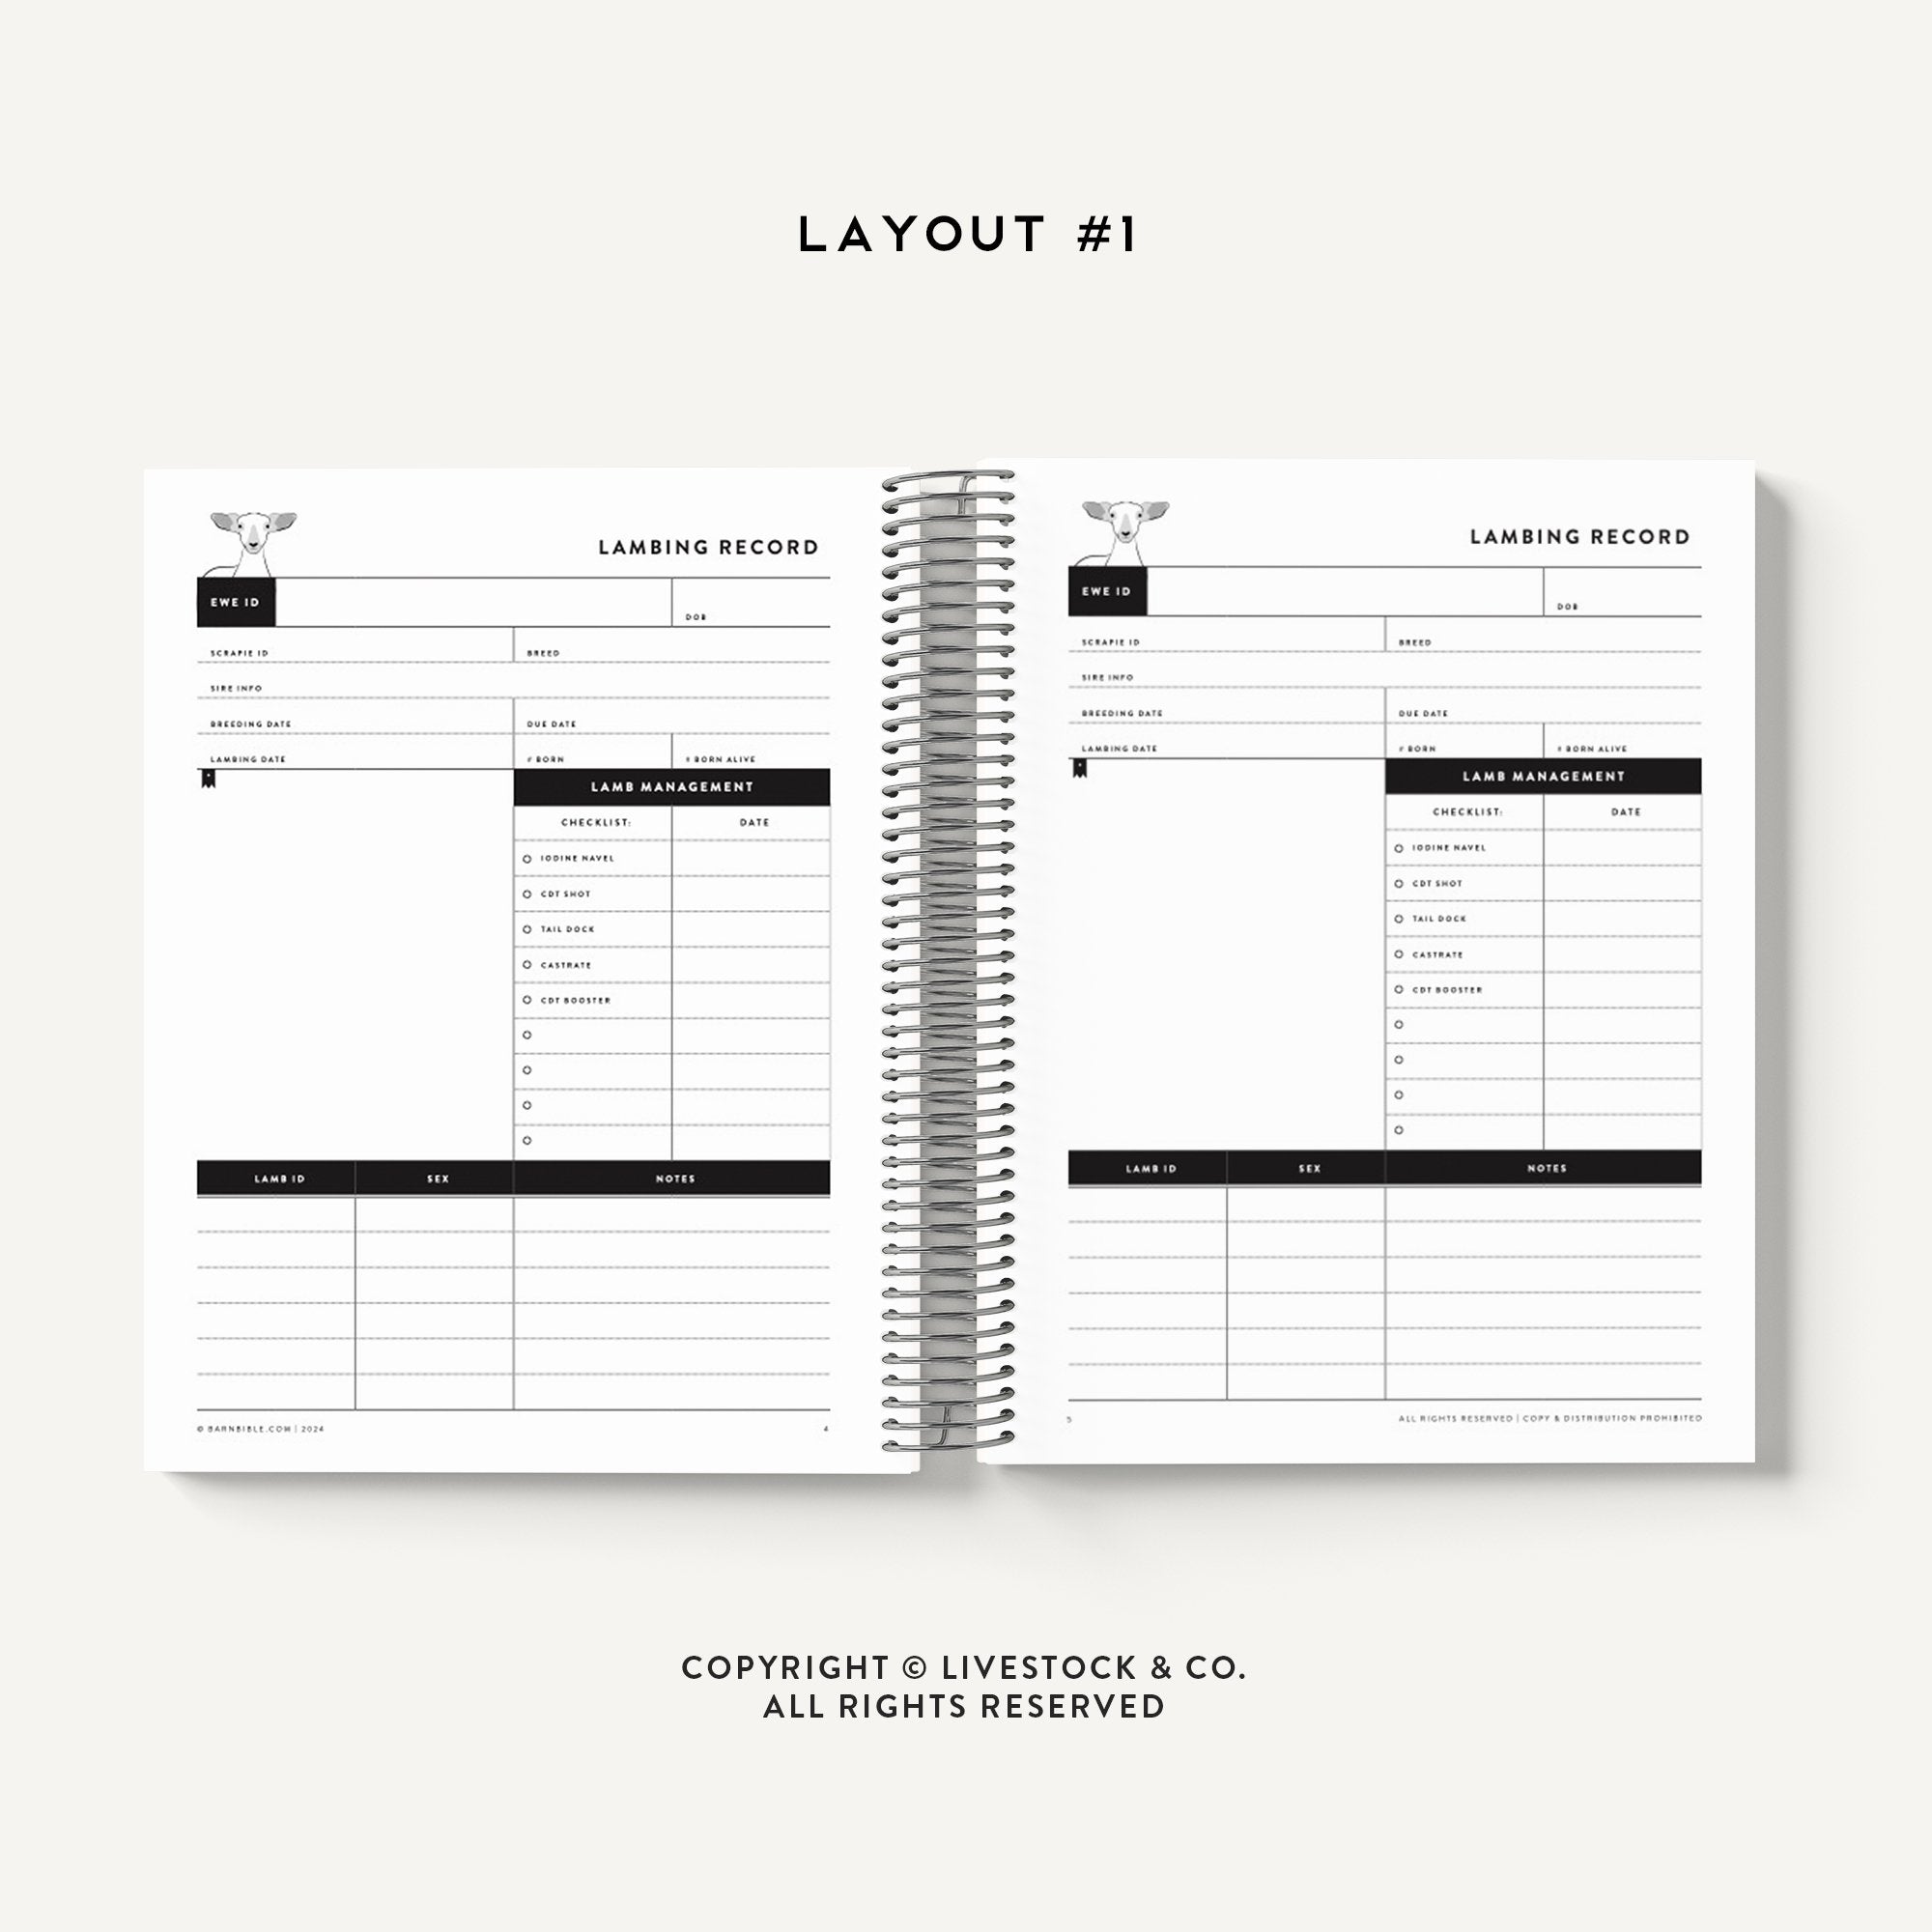 Personalized-Livestock-Lambing Record Planner - Patriotic Cover